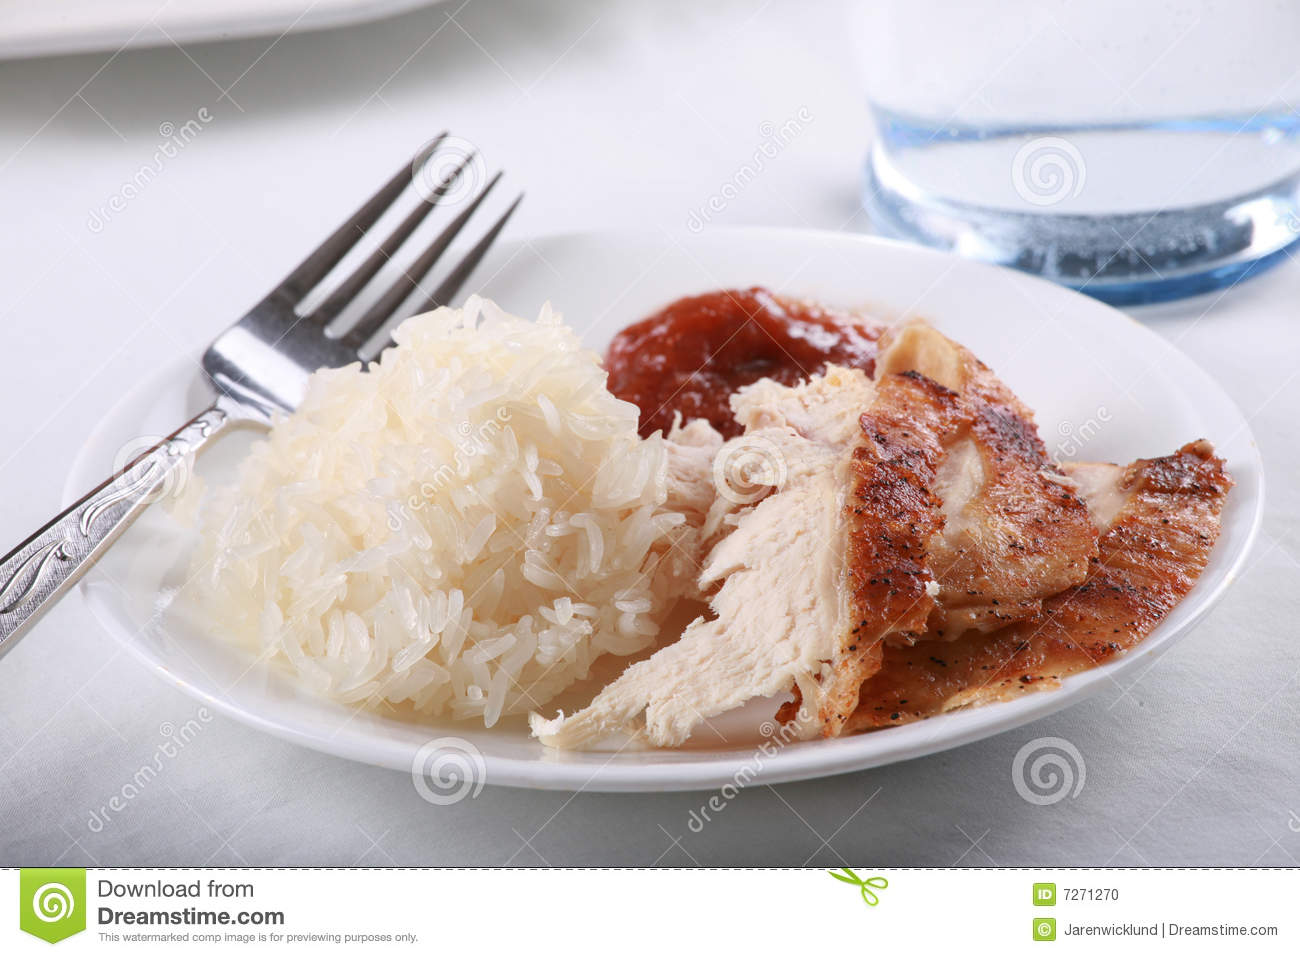 Chicken And Rice Meal Stock Photo   Image  7271270